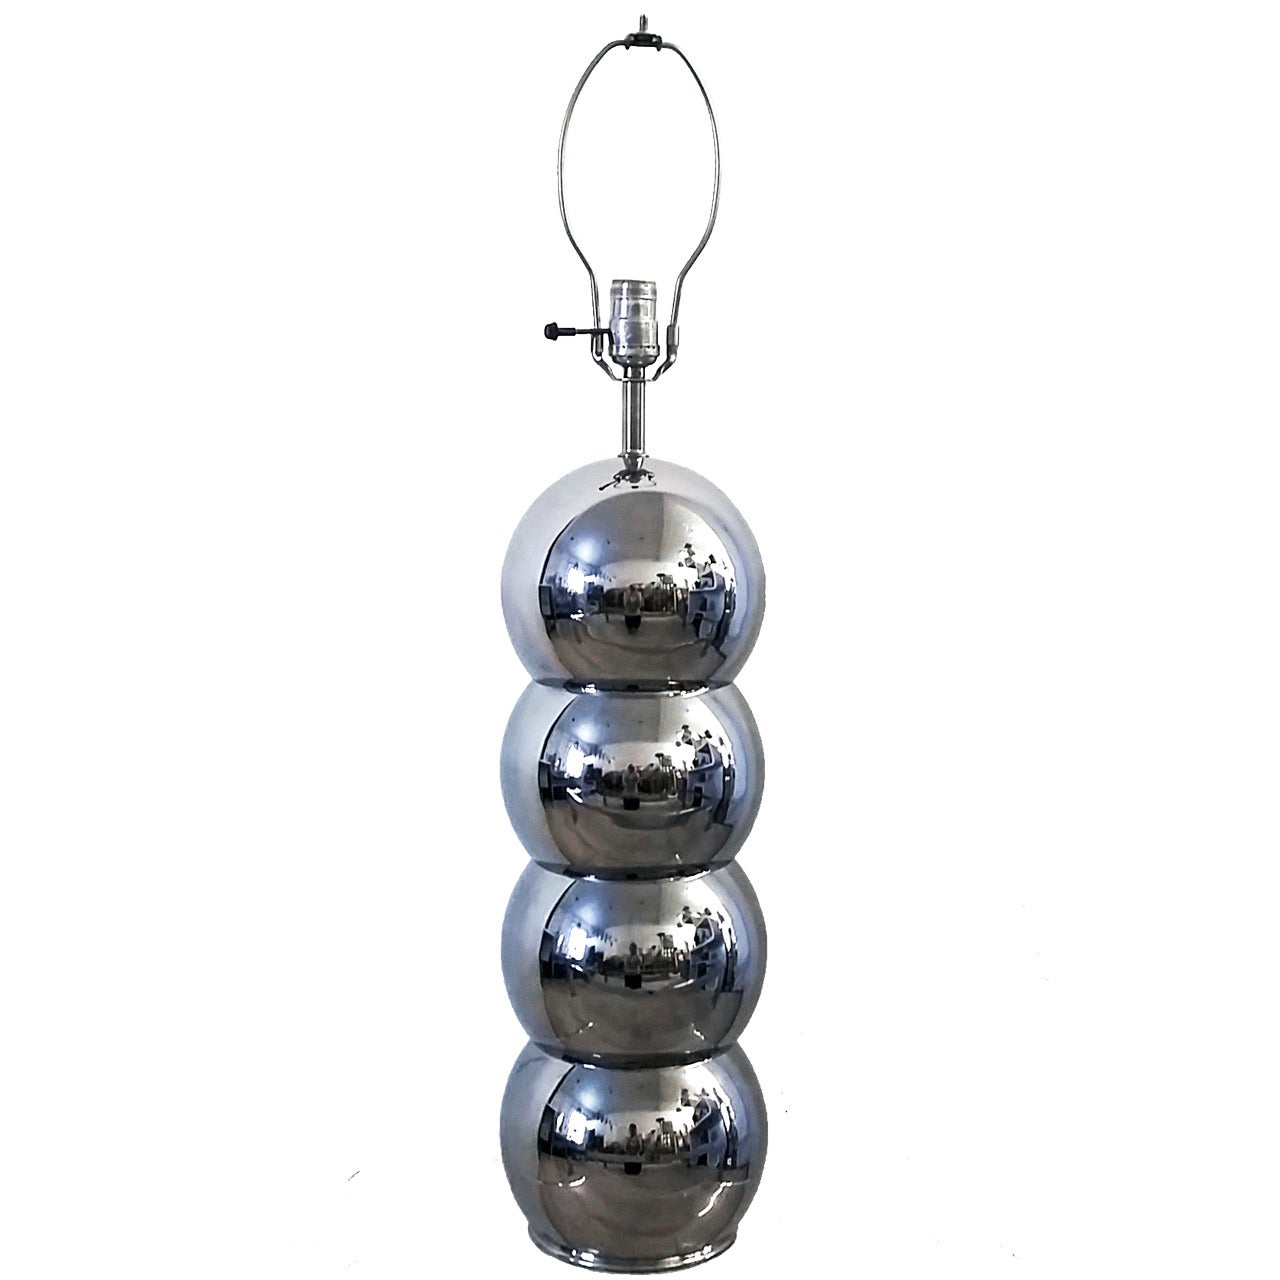 George Kovacs Chrome Stacked Ball Lamp